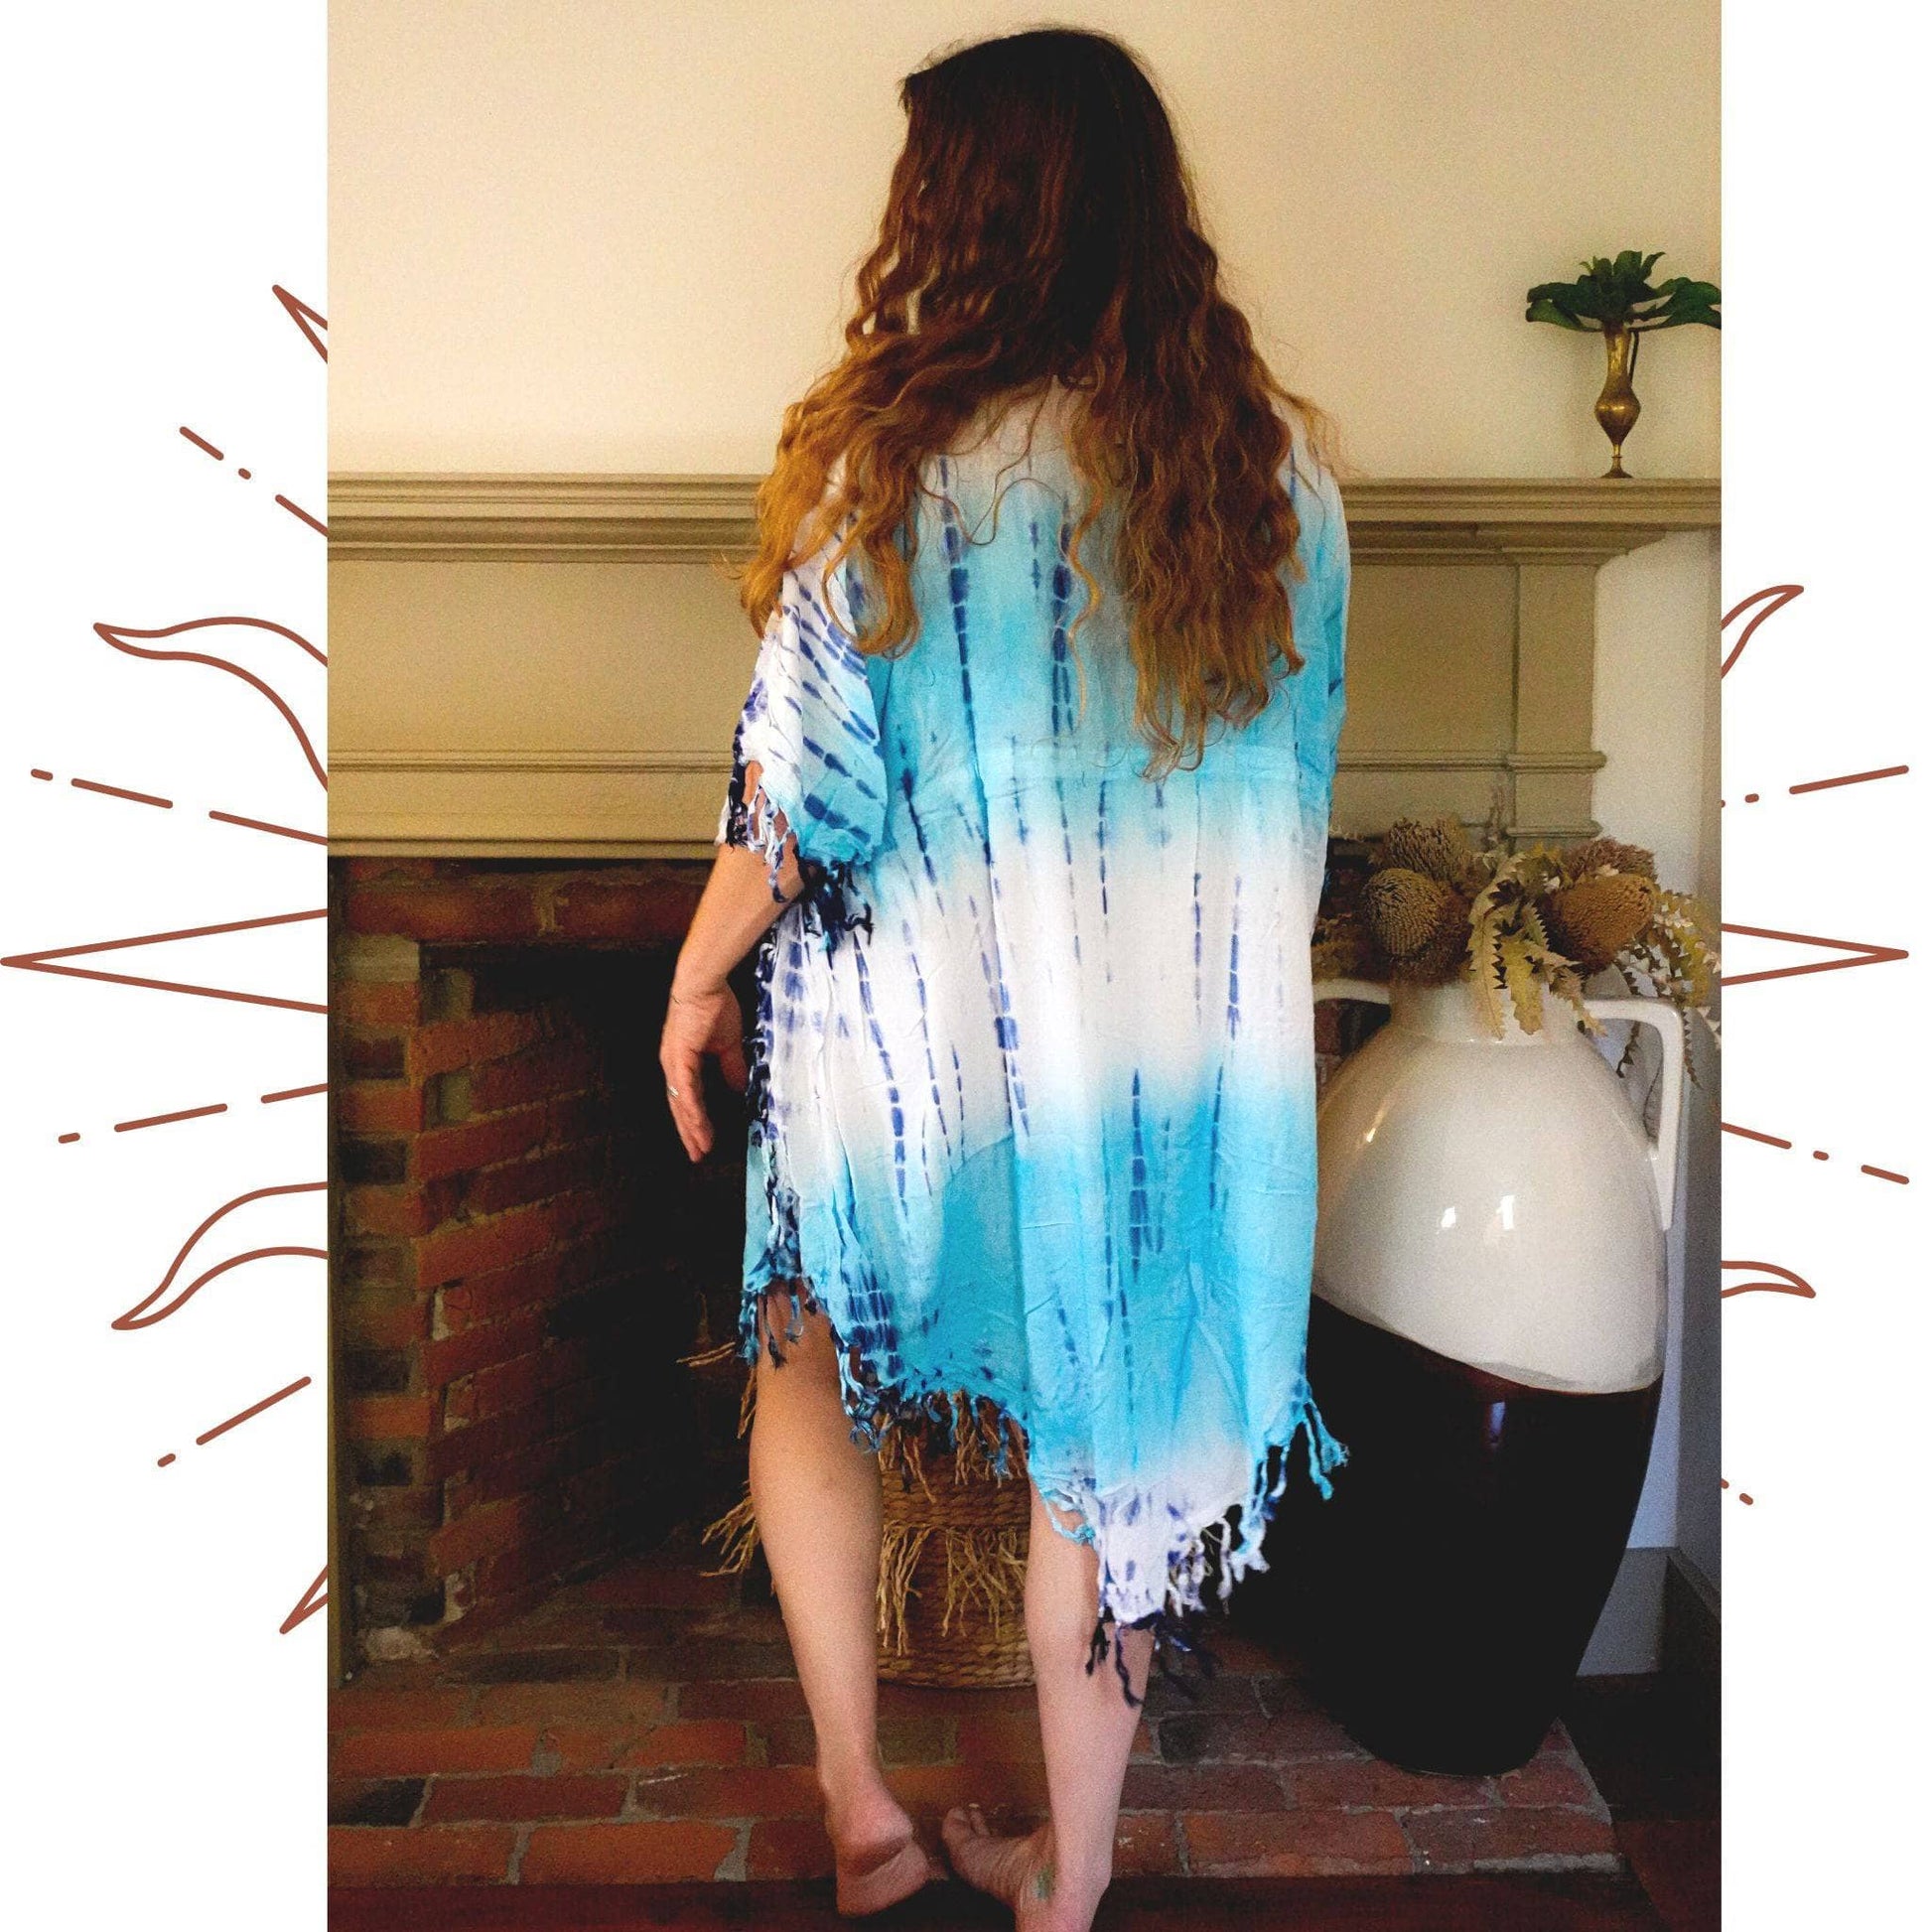 Nicole Snow wearing the tie dye sleep tunic in front of a fireplace with her back to the camera.